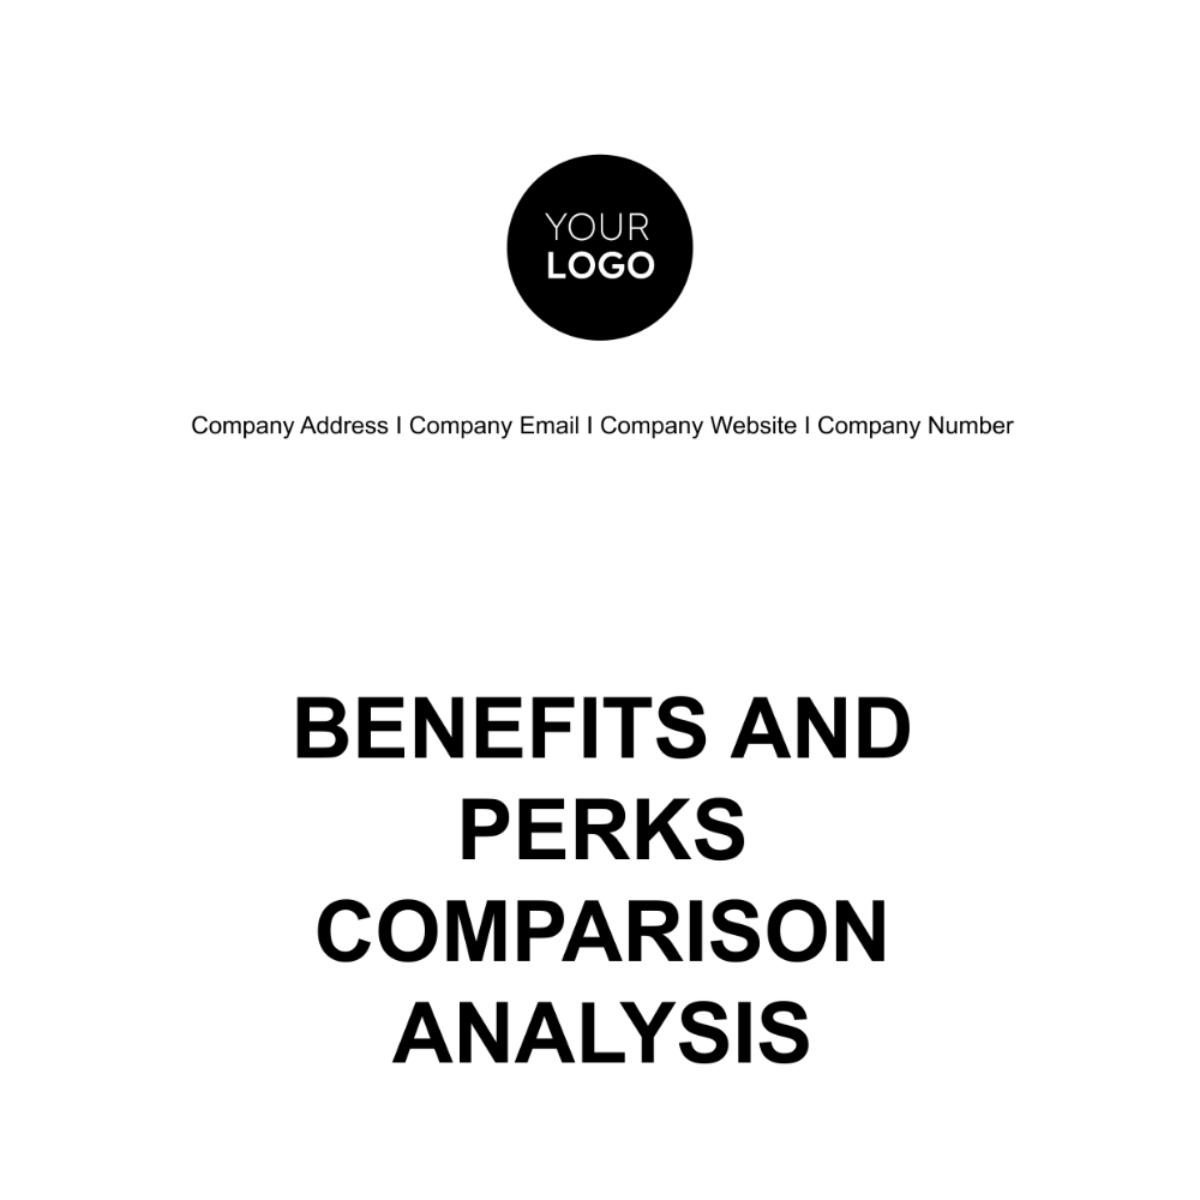 Benefits and Perks Comparison Analysis HR Template